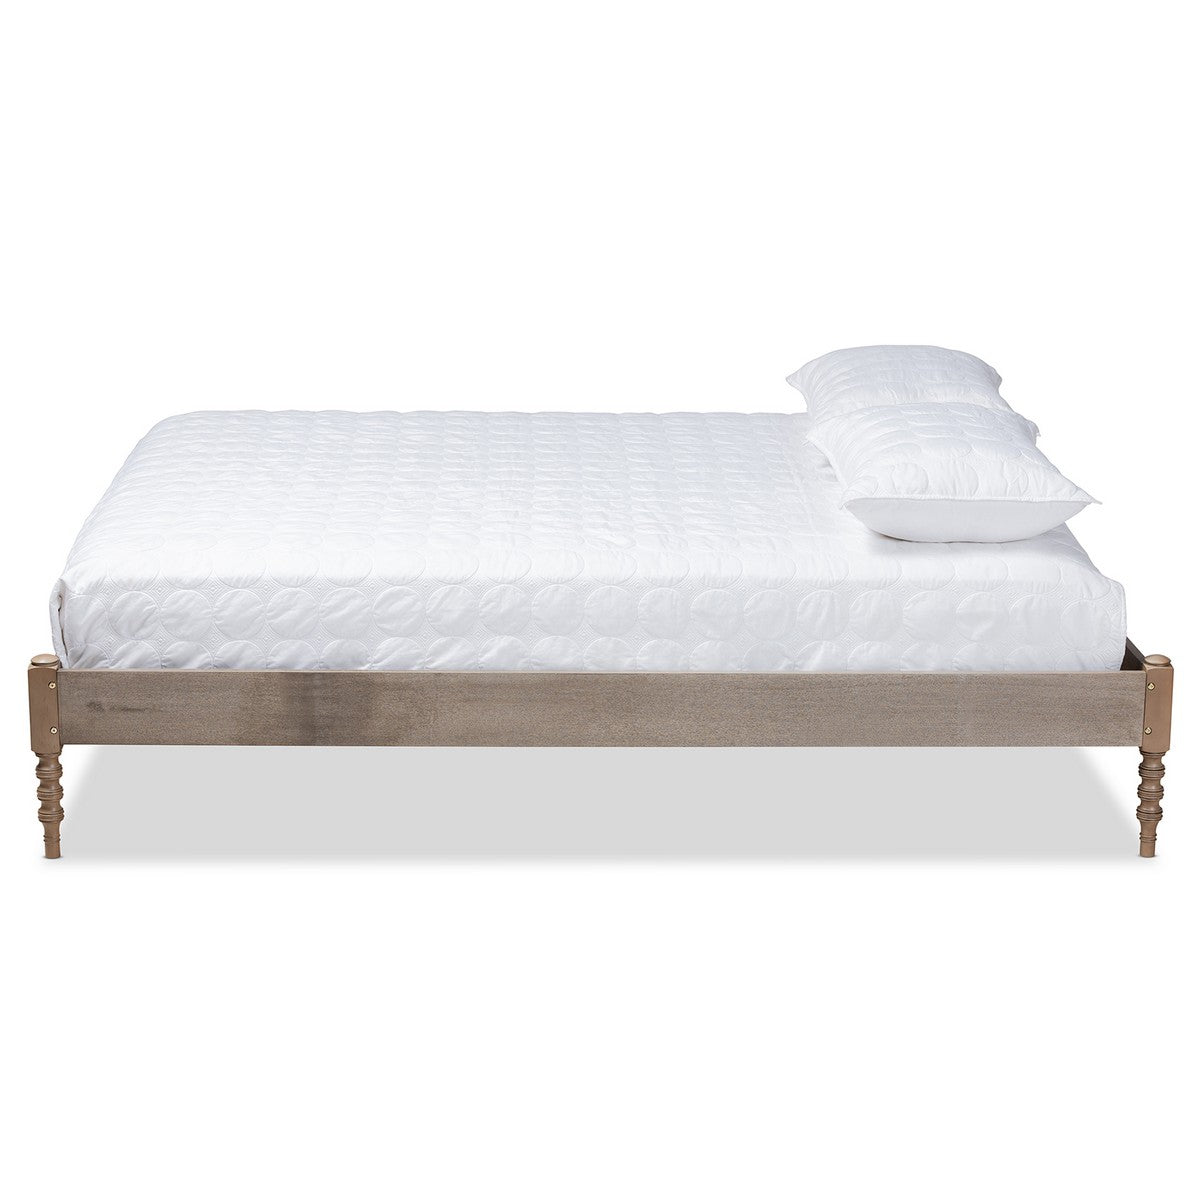 Baxton Studio Cielle French Bohemian Weathered Grey Oak Finished Wood Queen Size Platform Bed Frame